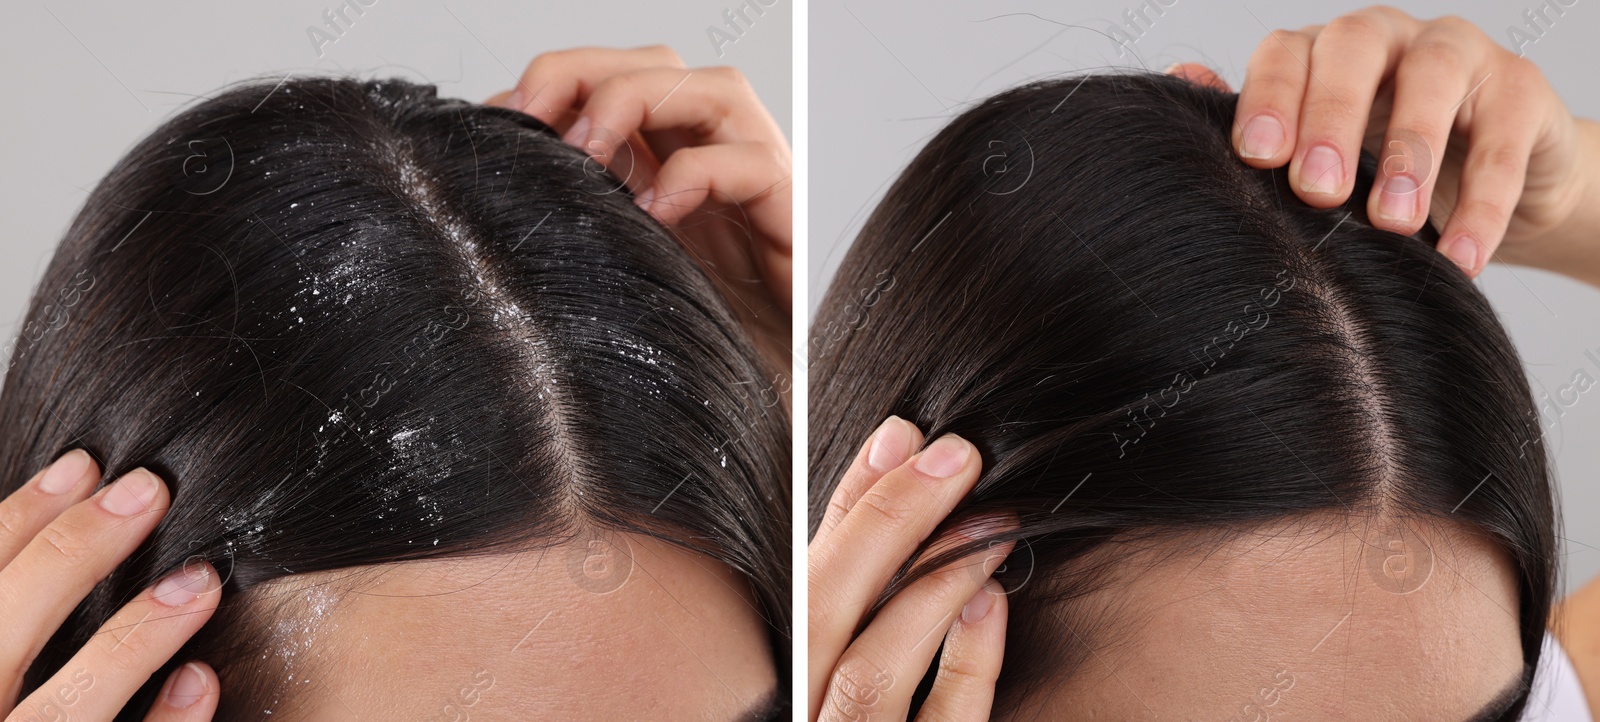 Image of Woman showing hair before and after dandruff treatment on grey background, collage